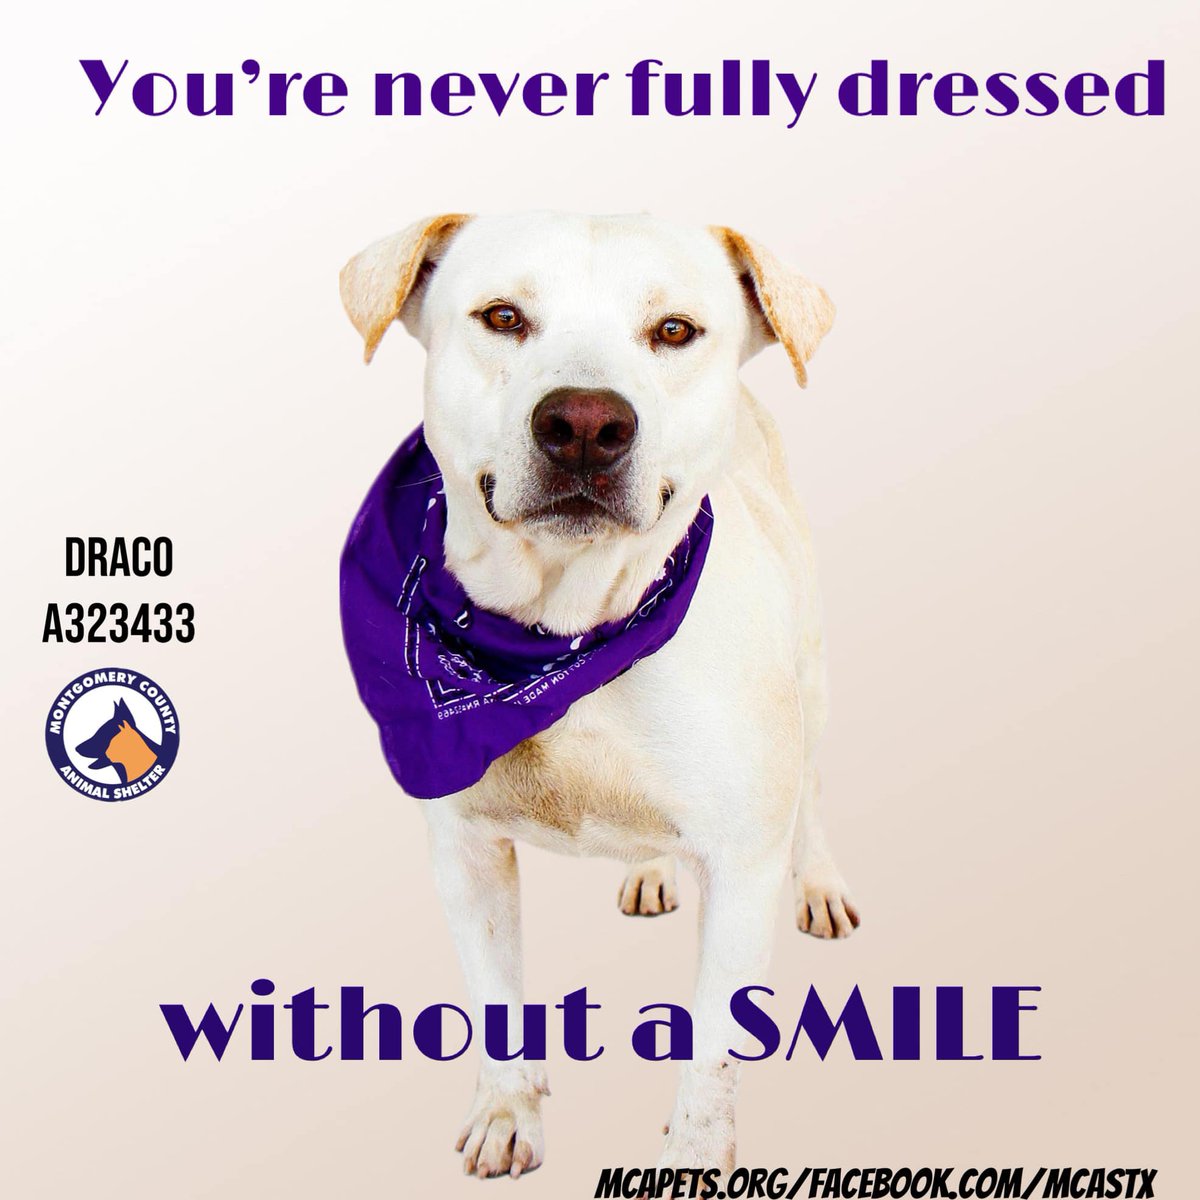 Draco (A323433) wants you to make sure you that you complete your outfit with a smile on your face! This smiley boy is a 2 year old lab mix, who obviously loves smiling for the camera. We are sure he will put a smile on your face when you meet him! bit.ly/2KZuQrc